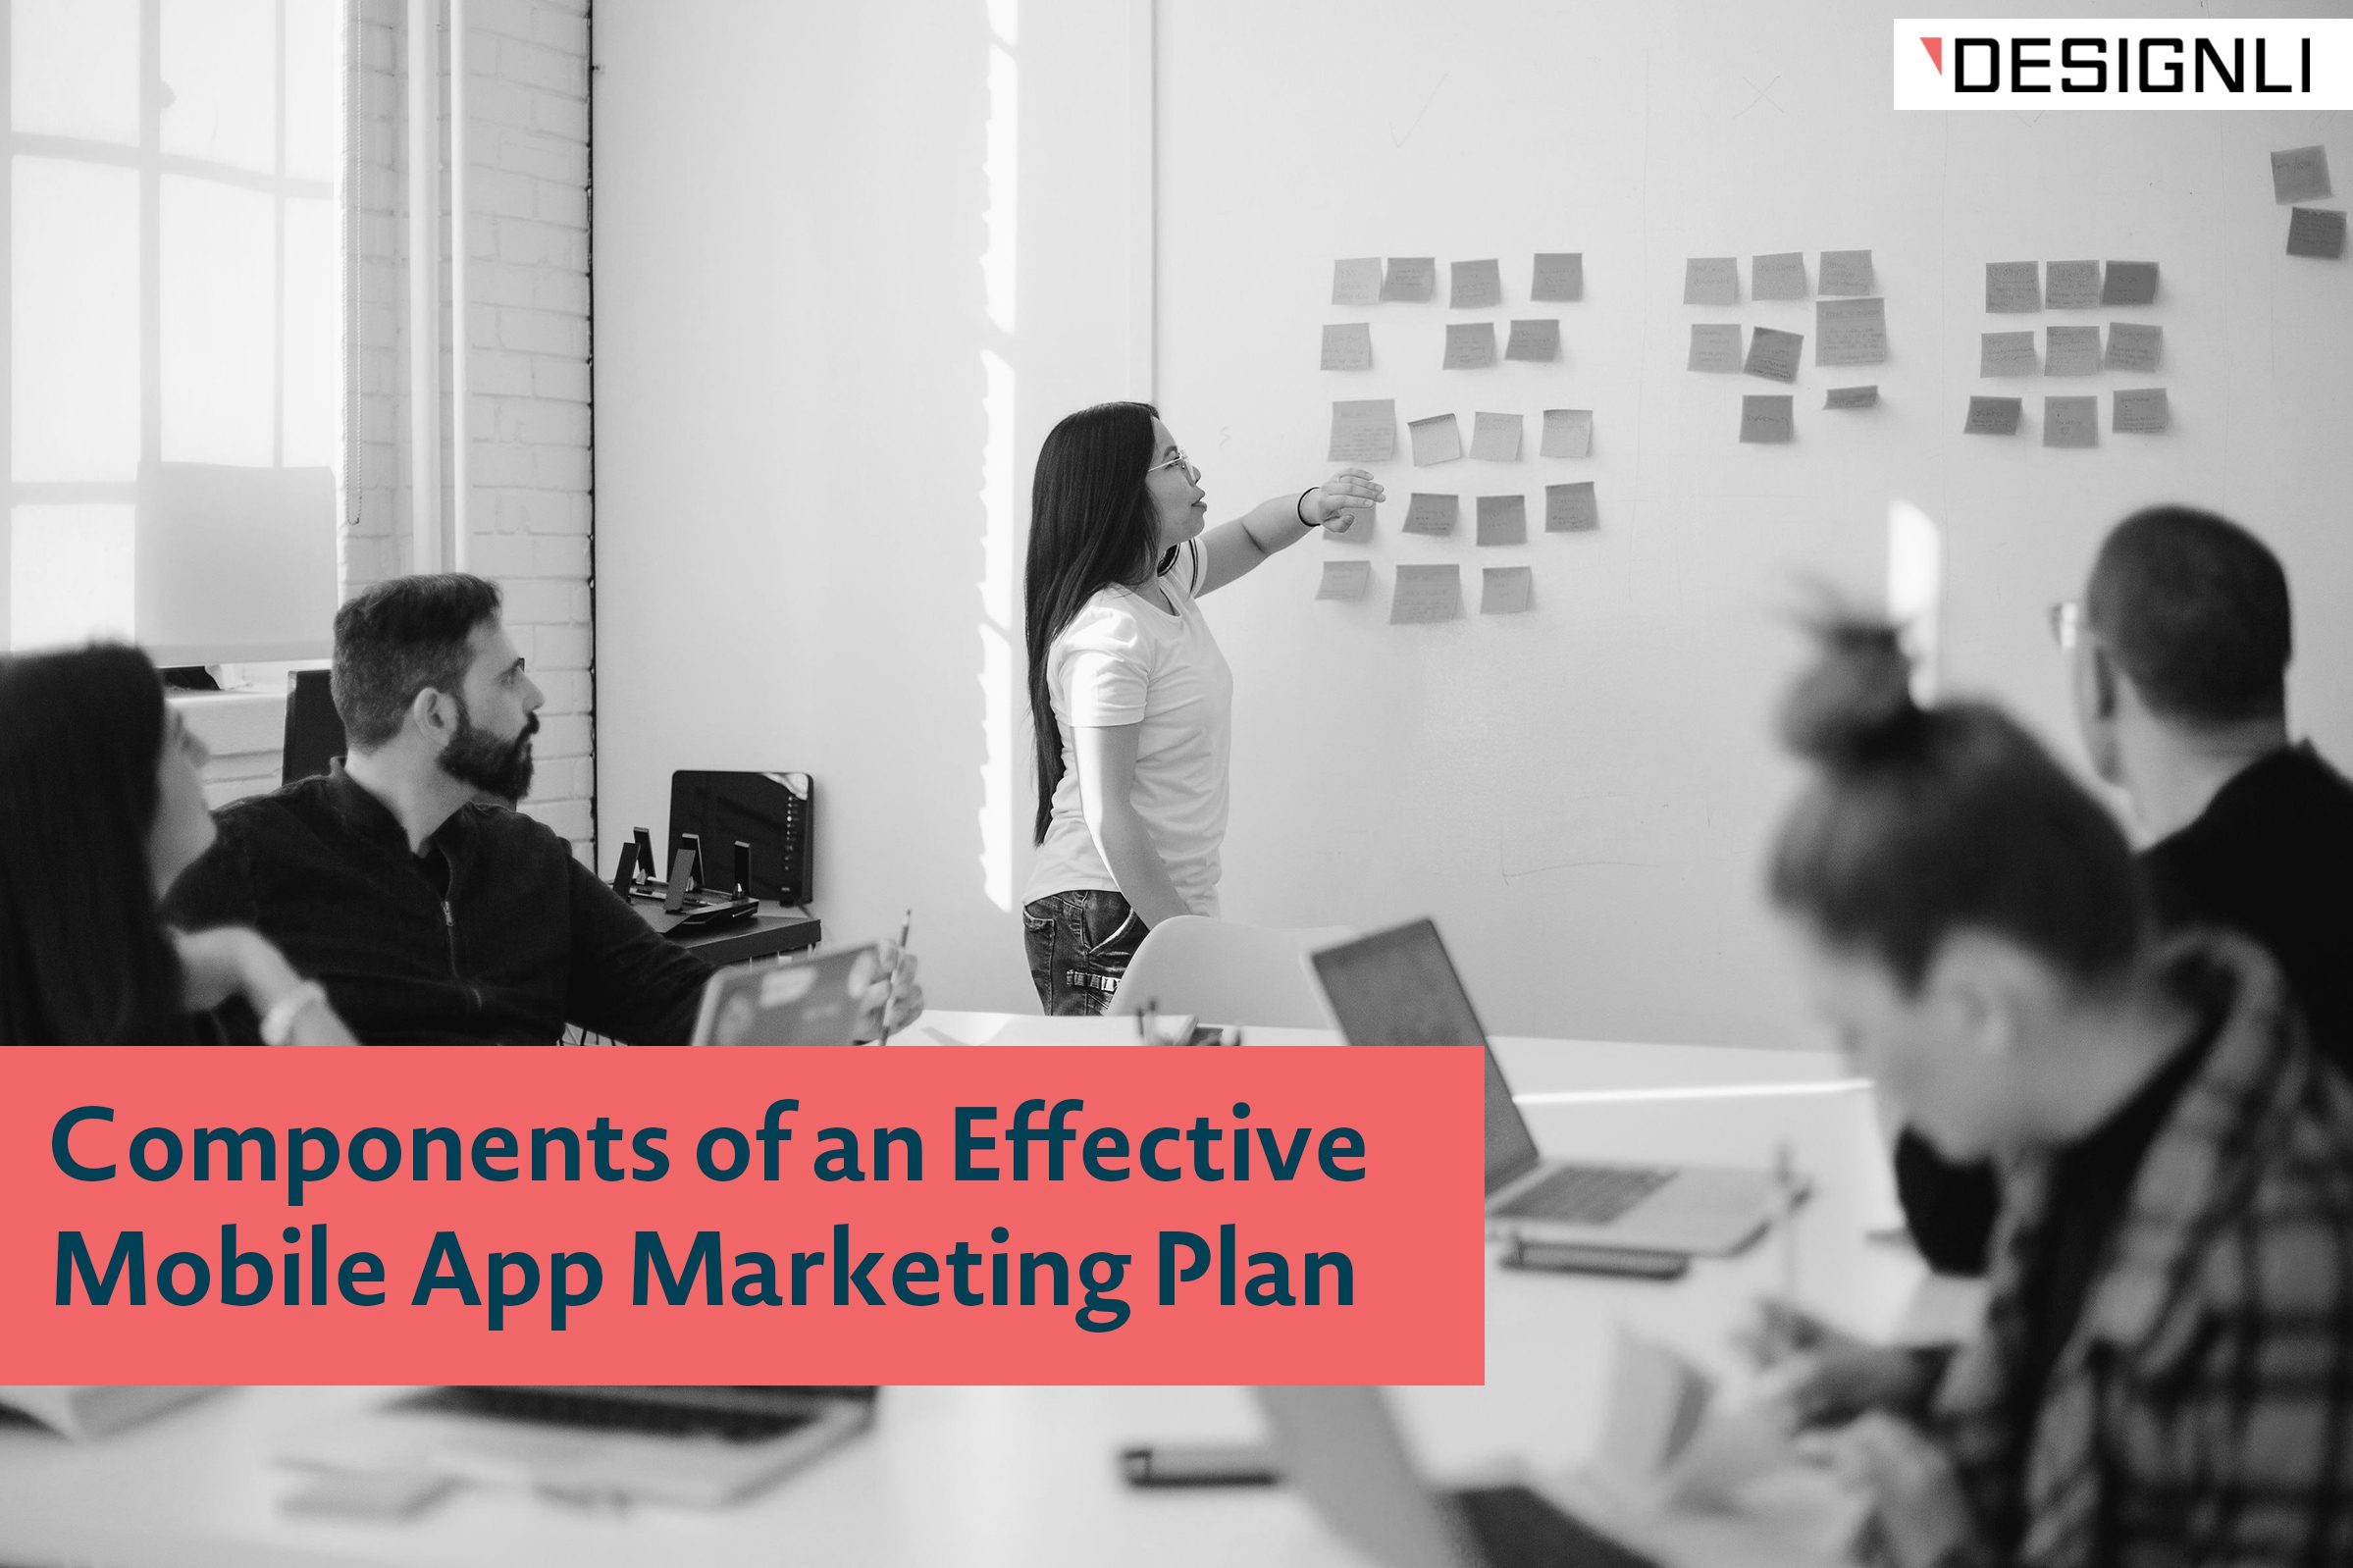 Components of an Effective Mobile App Marketing Plan